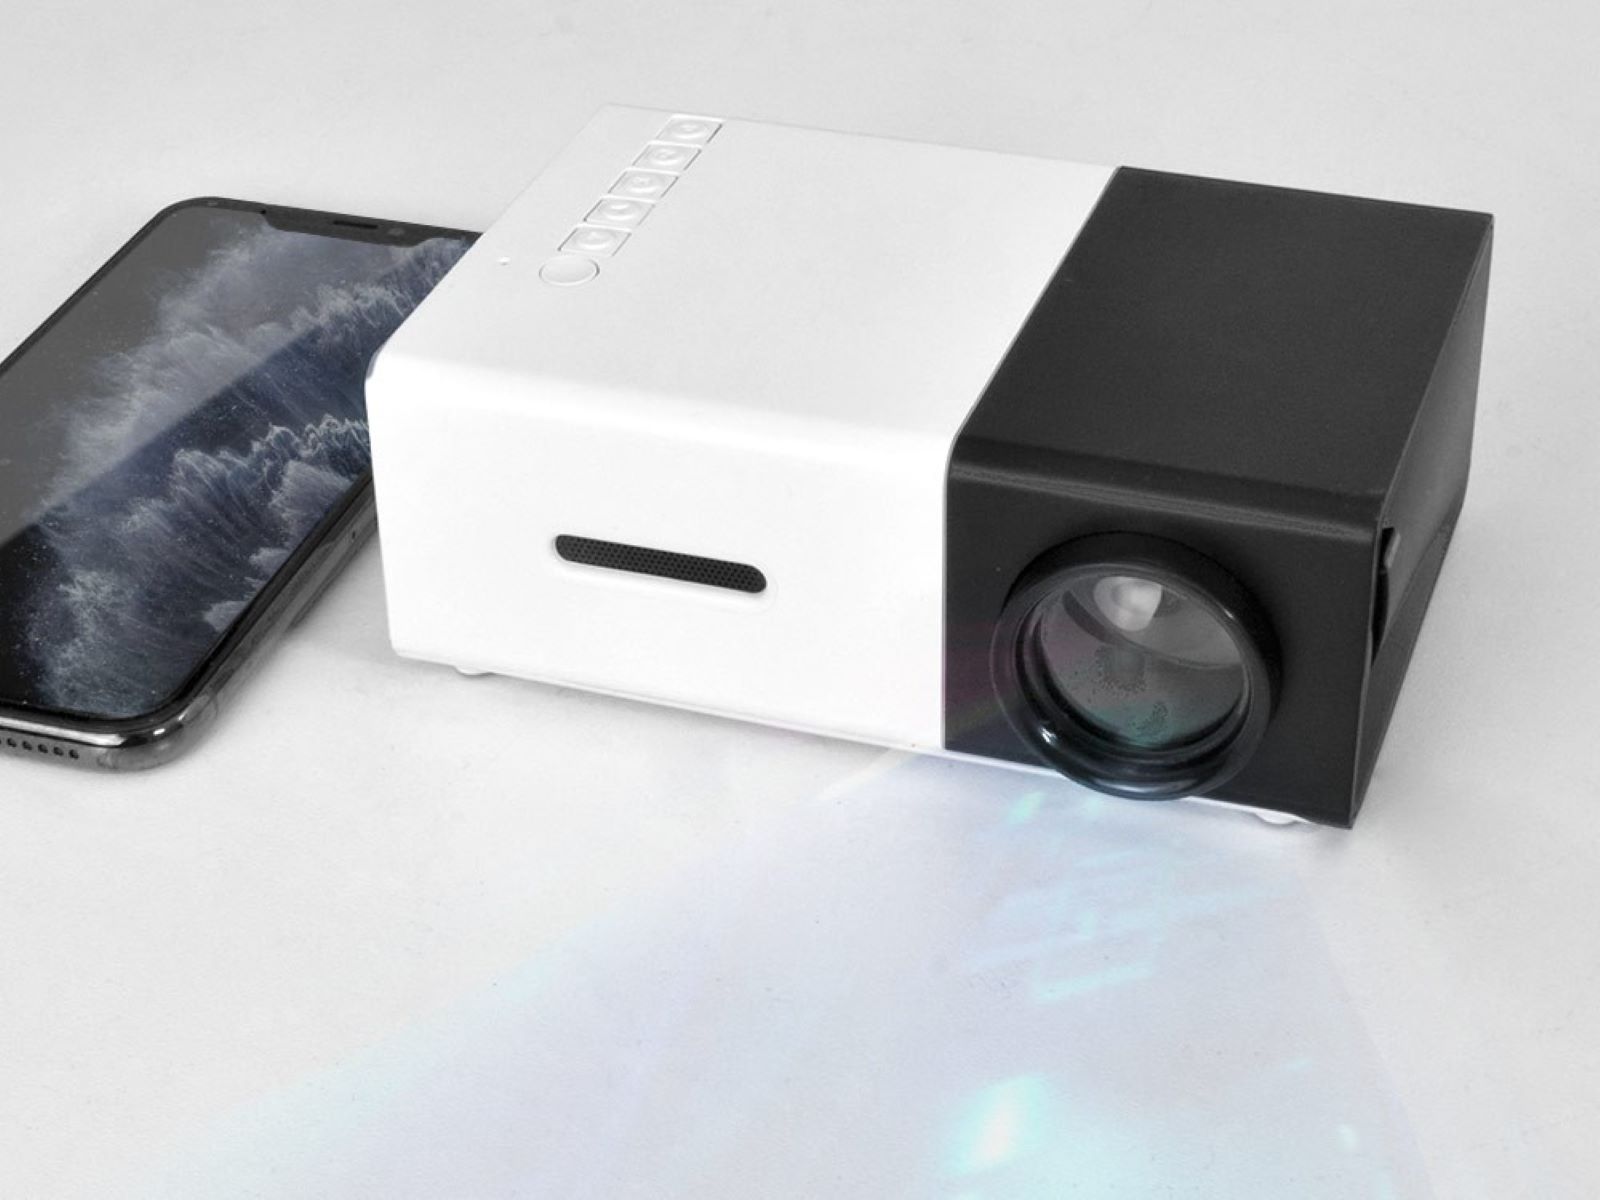 Connecting High Peak Mini Projector To Phone: Step-by-Step Instructions